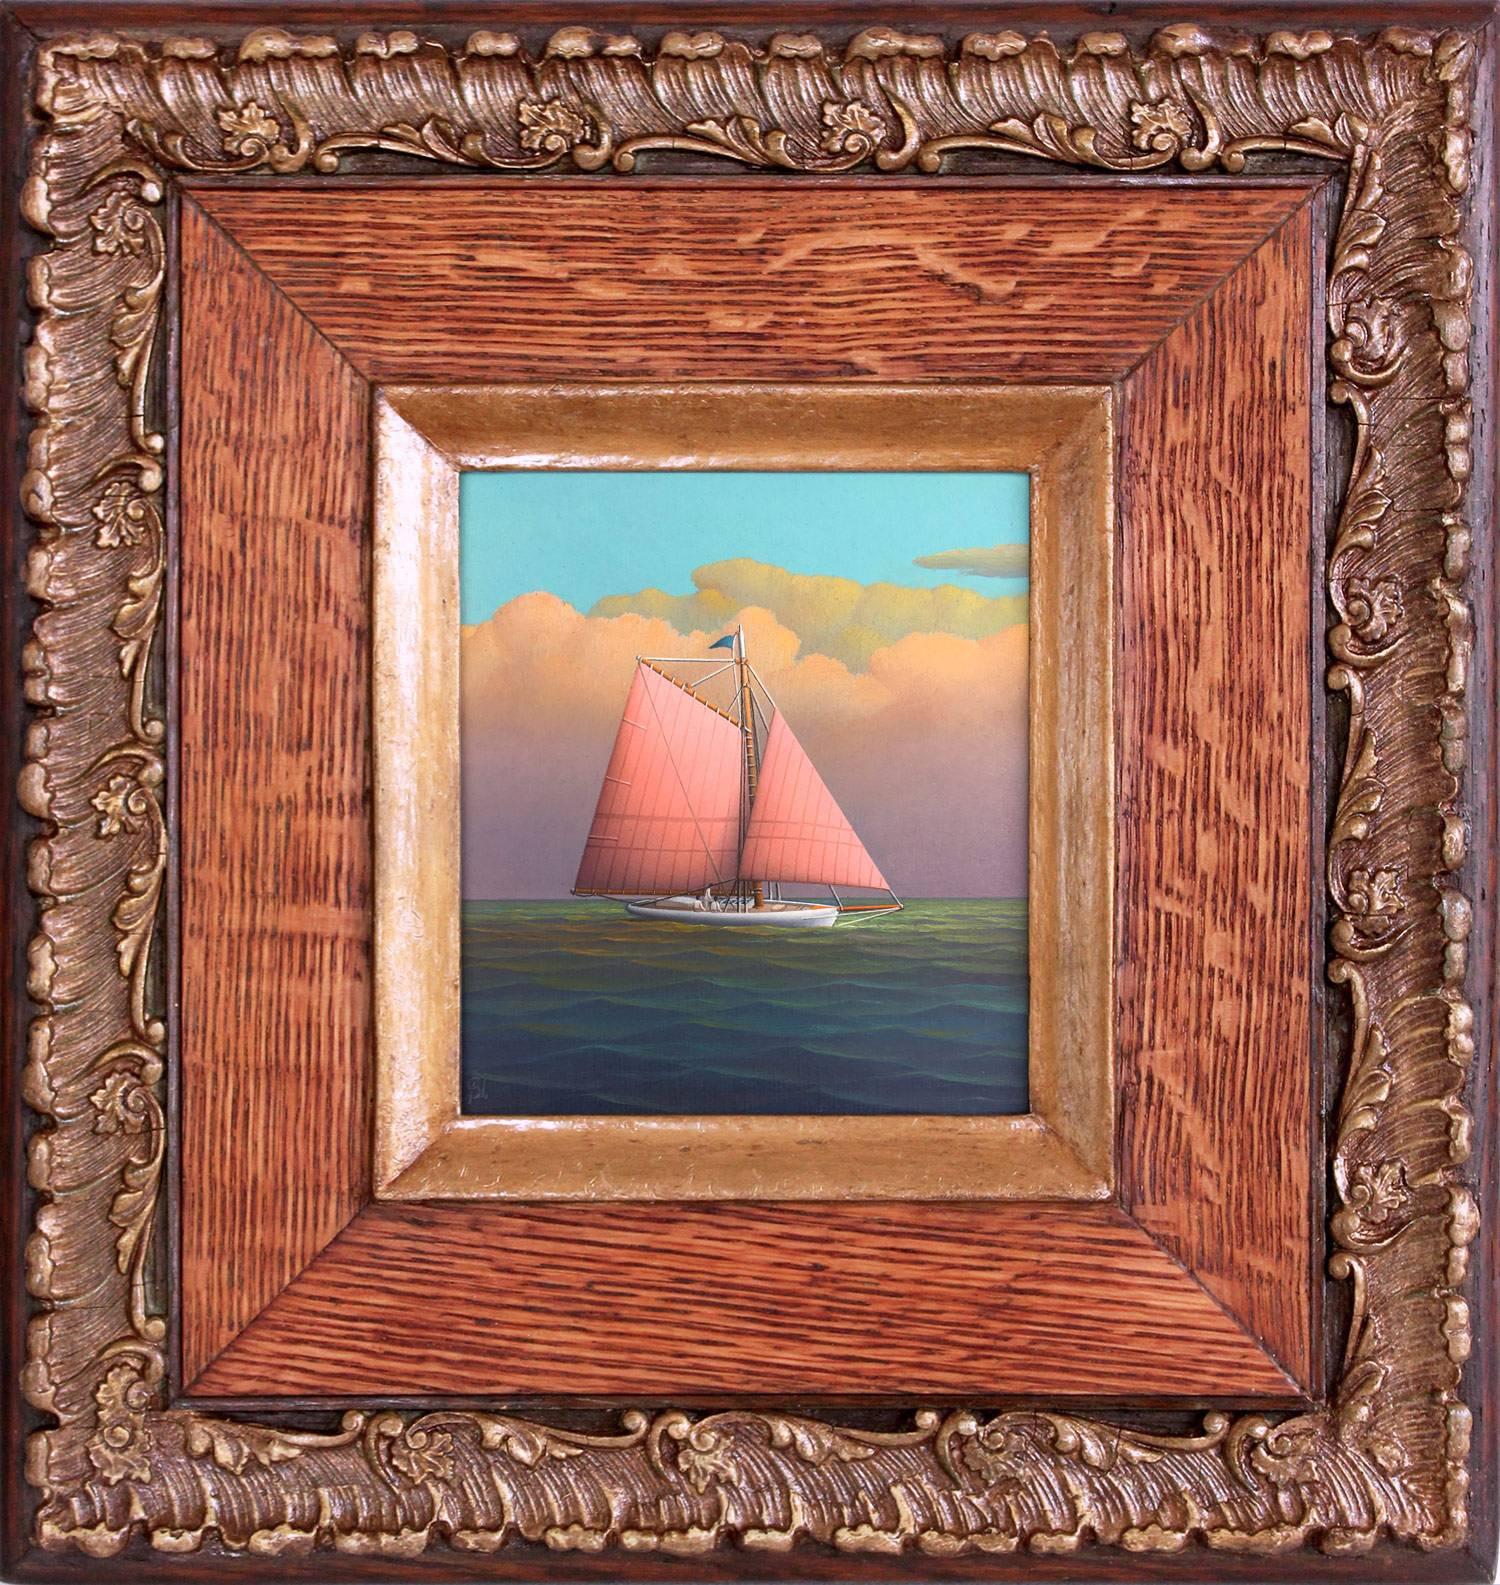 George Nemethy Landscape Painting - "Tranquil Sailing" Realist Oil Painting on Canvas Board of Sailboat in Open Sea